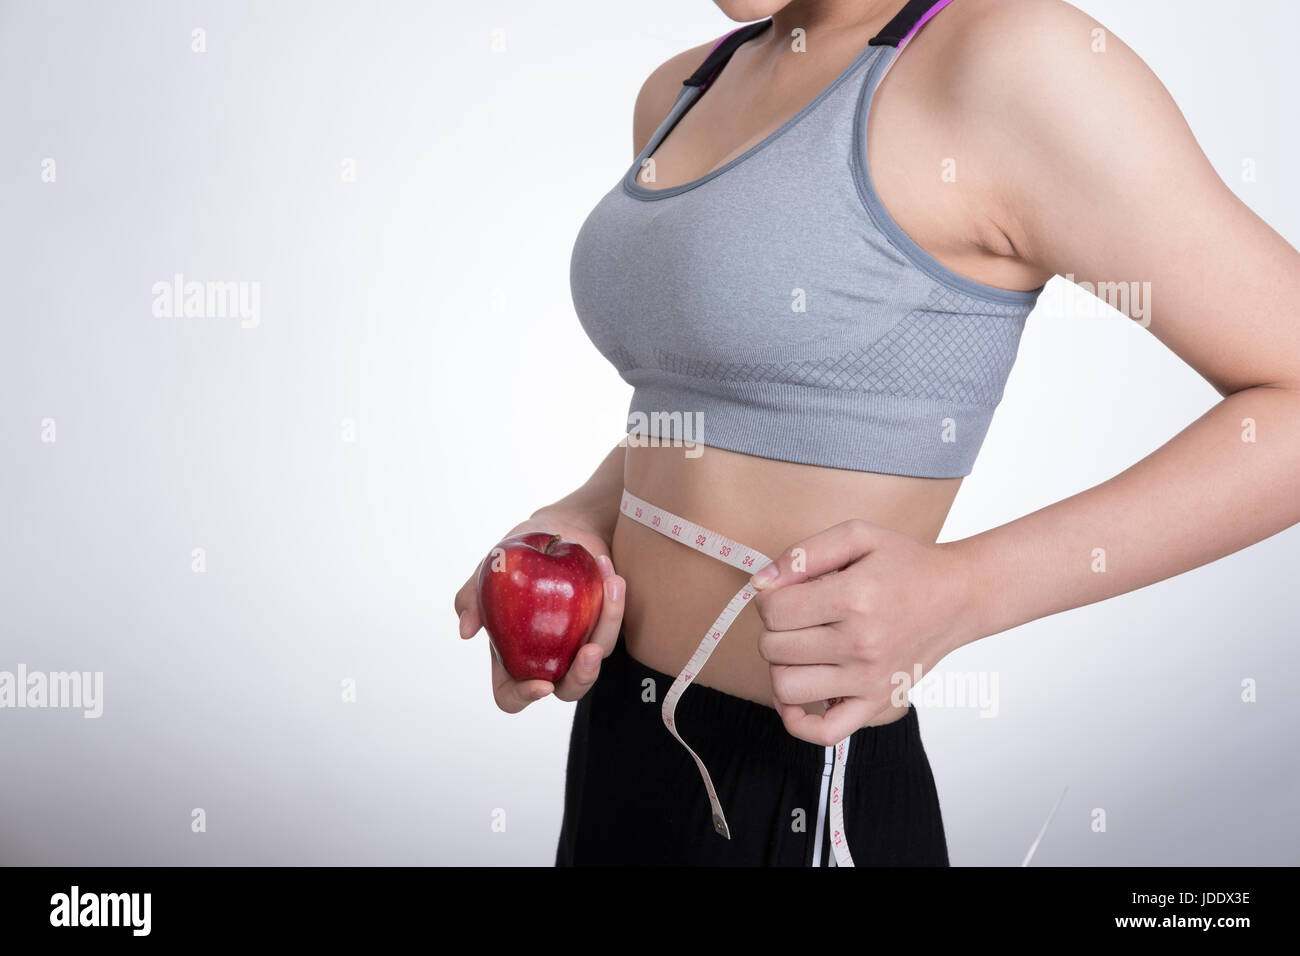 beautiful girl exercising Use the waist tape measure to check your waist  circumference during daily exercise. 11129242 Stock Photo at Vecteezy